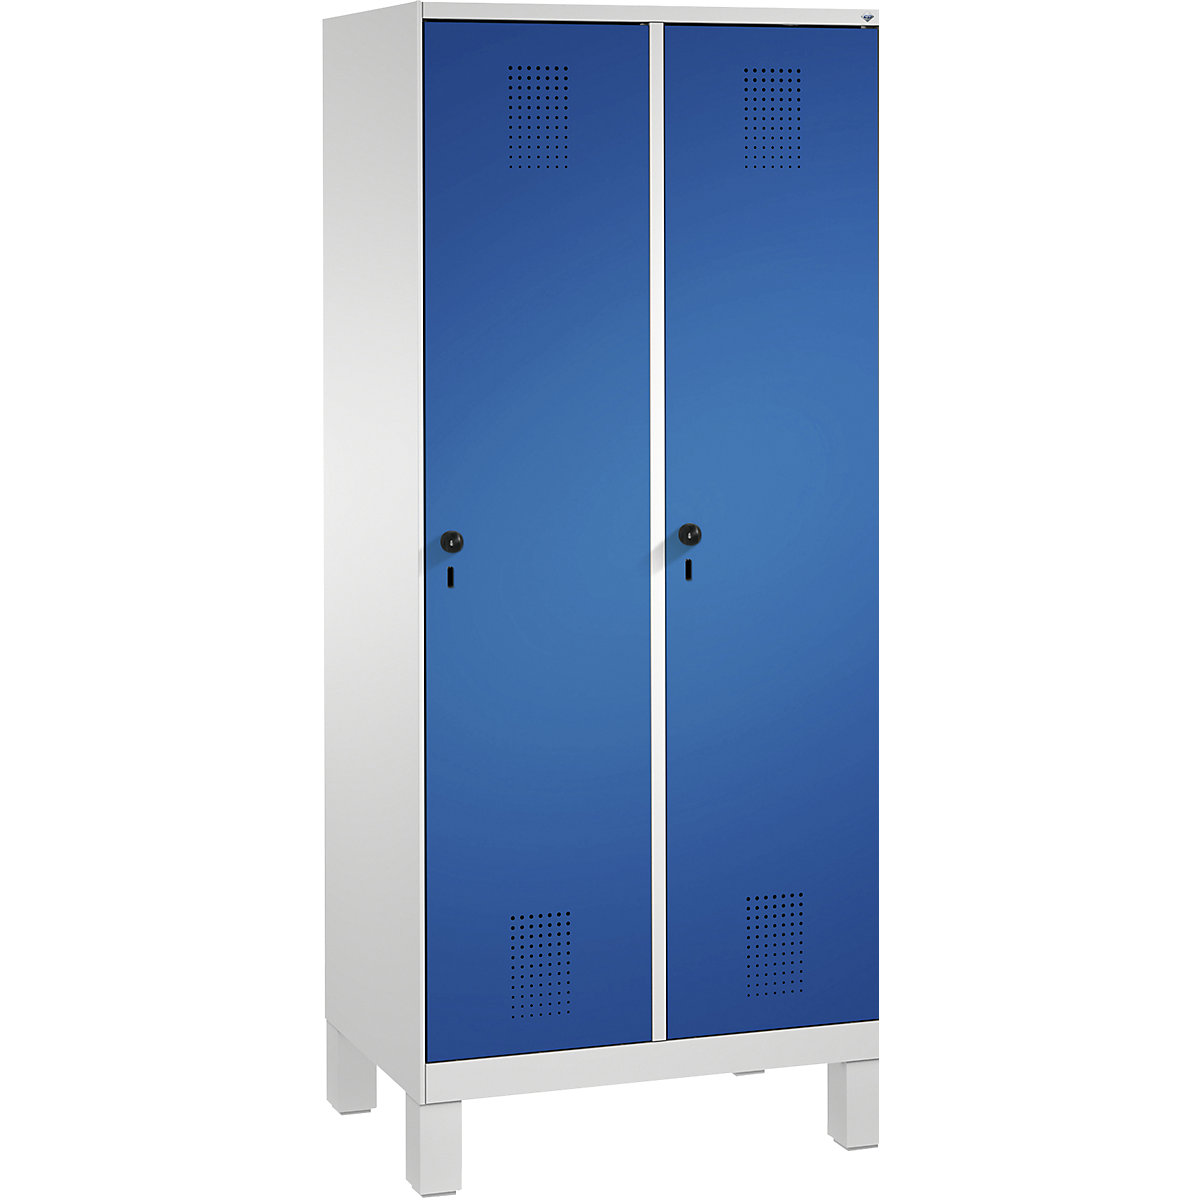 EVOLO cloakroom locker, with feet – C+P, 2 compartments, compartment width 400 mm, light grey / gentian blue-10